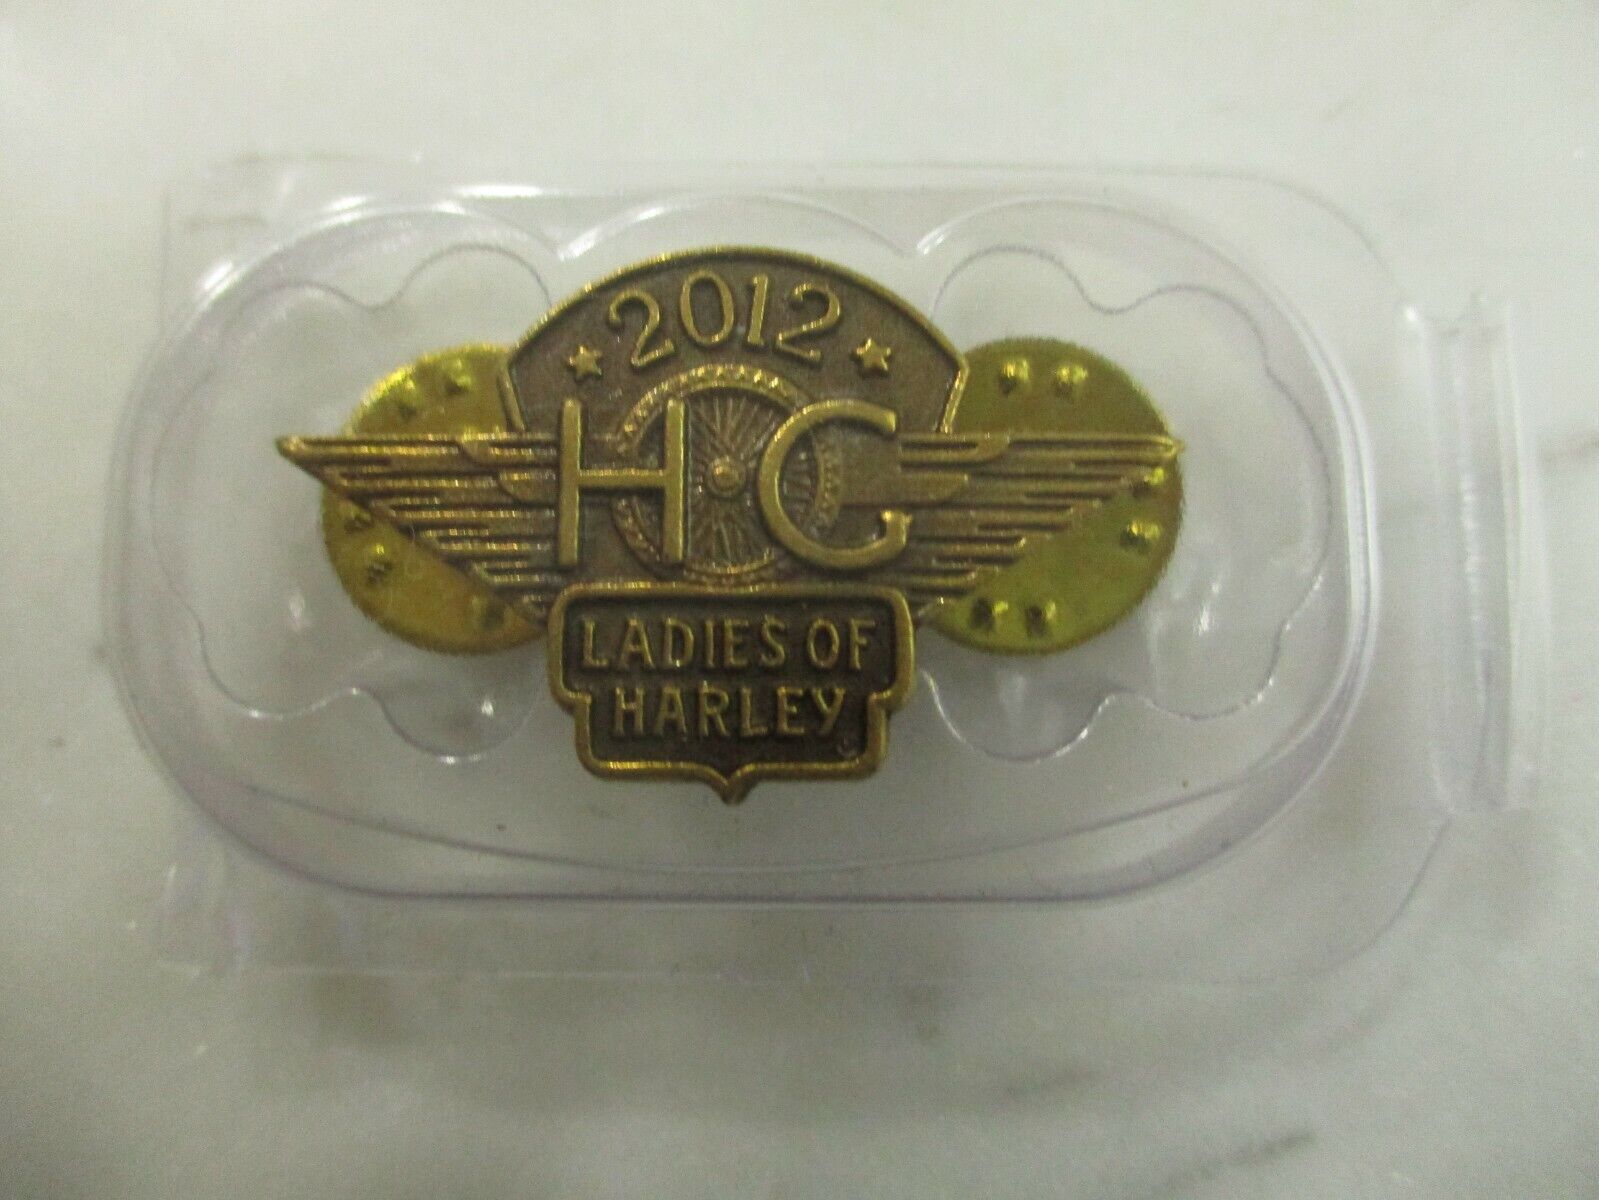 H.O.G Harley Button Pin back Gold tone Biker Motorcycle 2012 Ladies of Harley